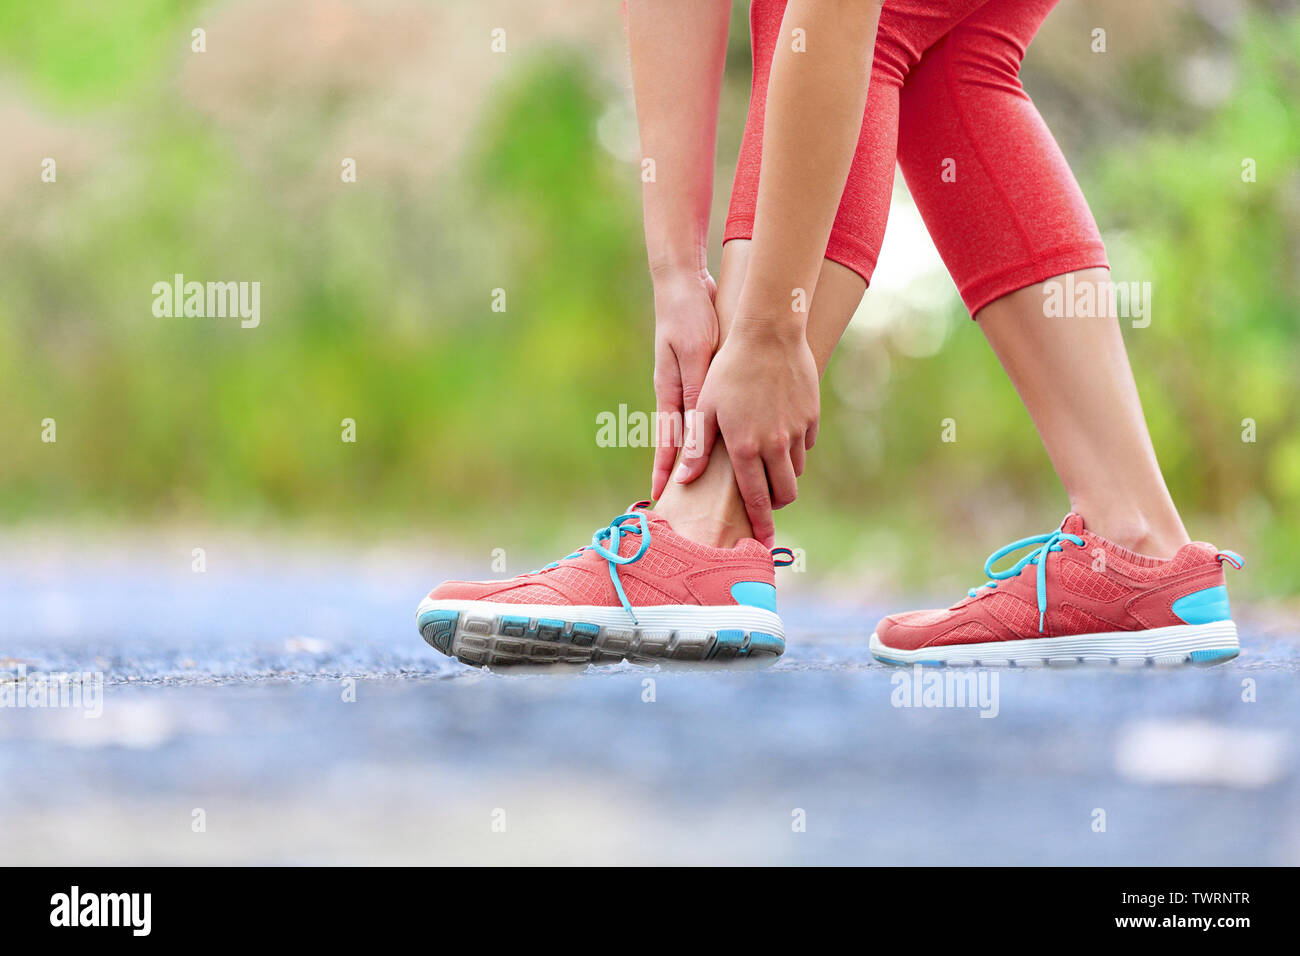 Twisted broken ankle - running sport injury. Female runner touching foot in pain due to sprained ankle. Stock Photo